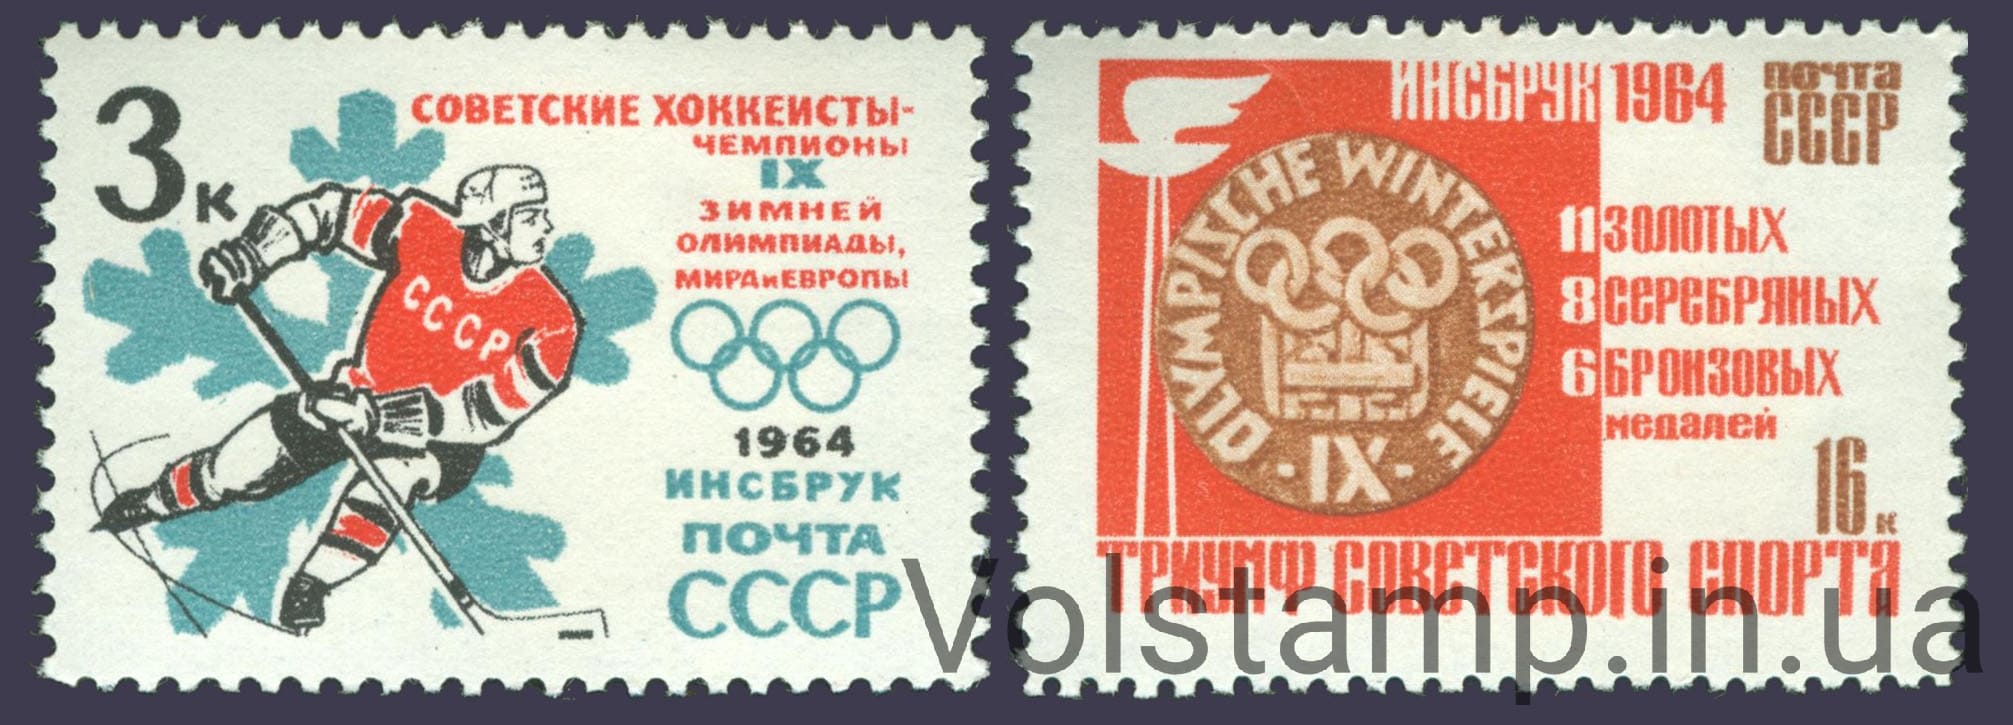 1964 series of stamps of victory of Soviet athletes at the IX Winter Olympics №2920-2921